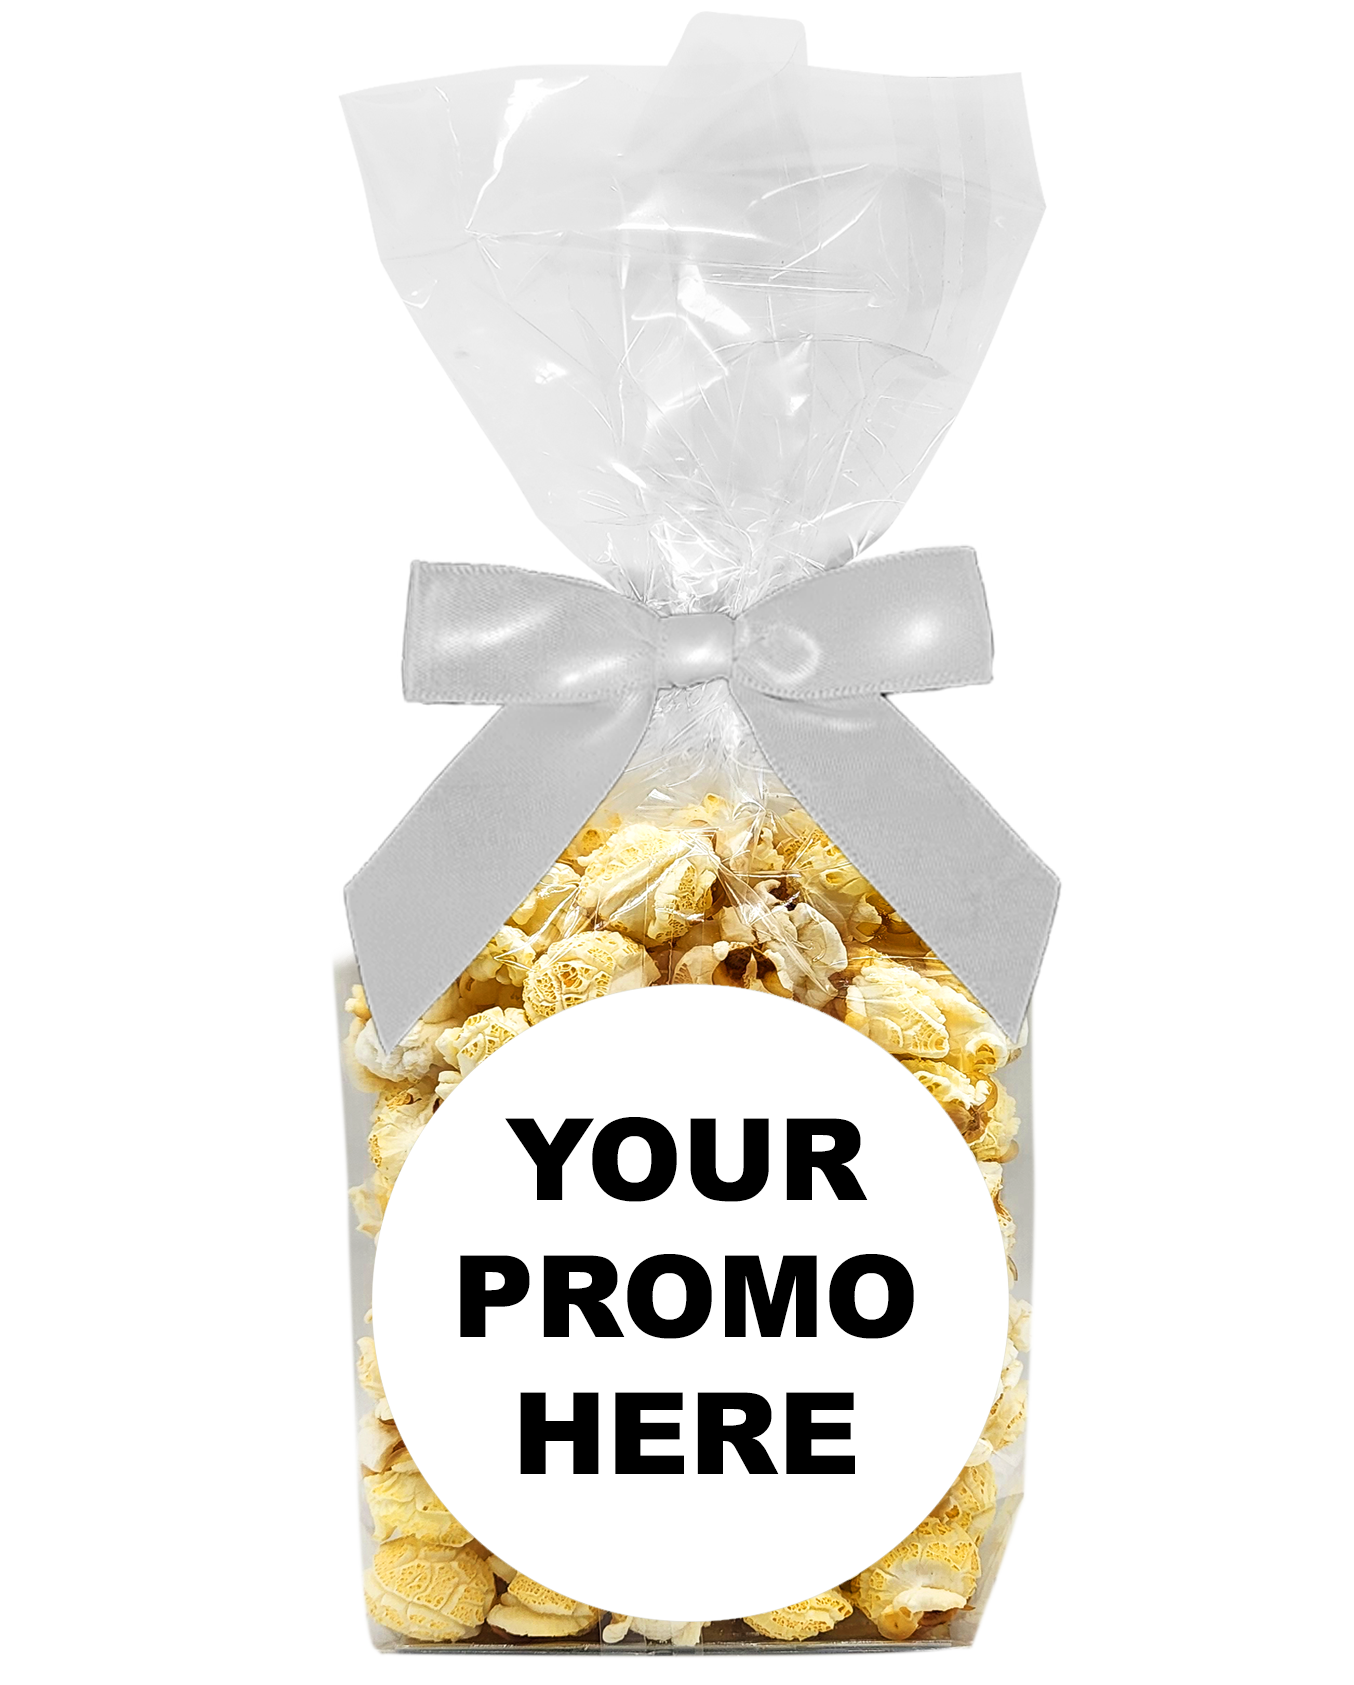 Kettle Clouds™ - Kettle Corn Bags & Bows (as low as $3.99 per bag) Case of 12 Price